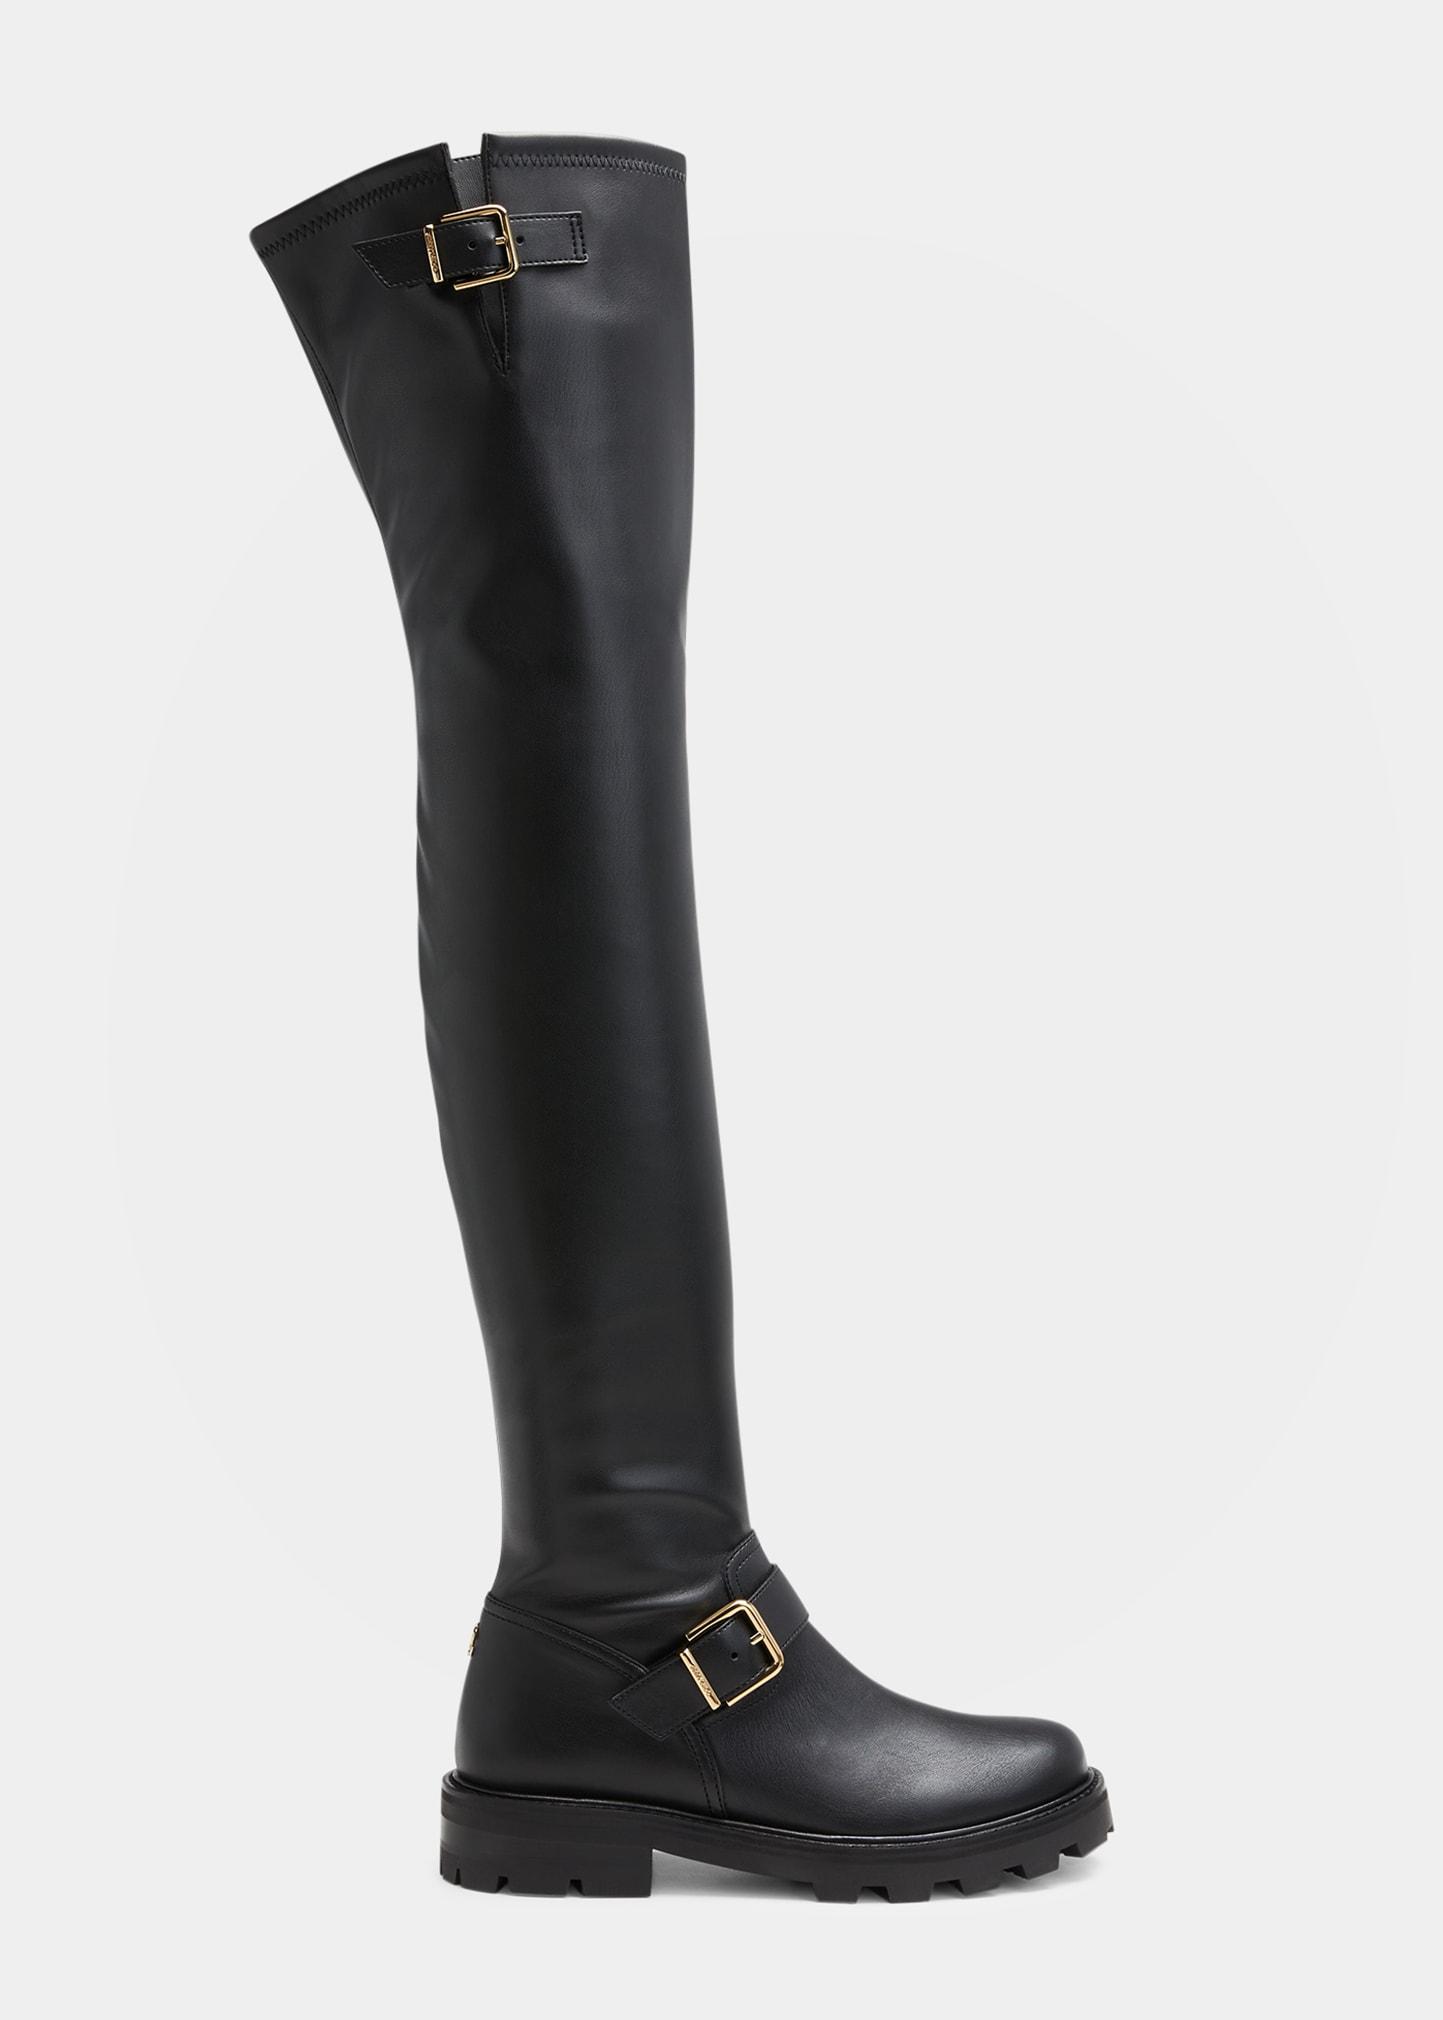 Jimmy Choo Leather Over-the-knee Biker Boots in Black | Lyst